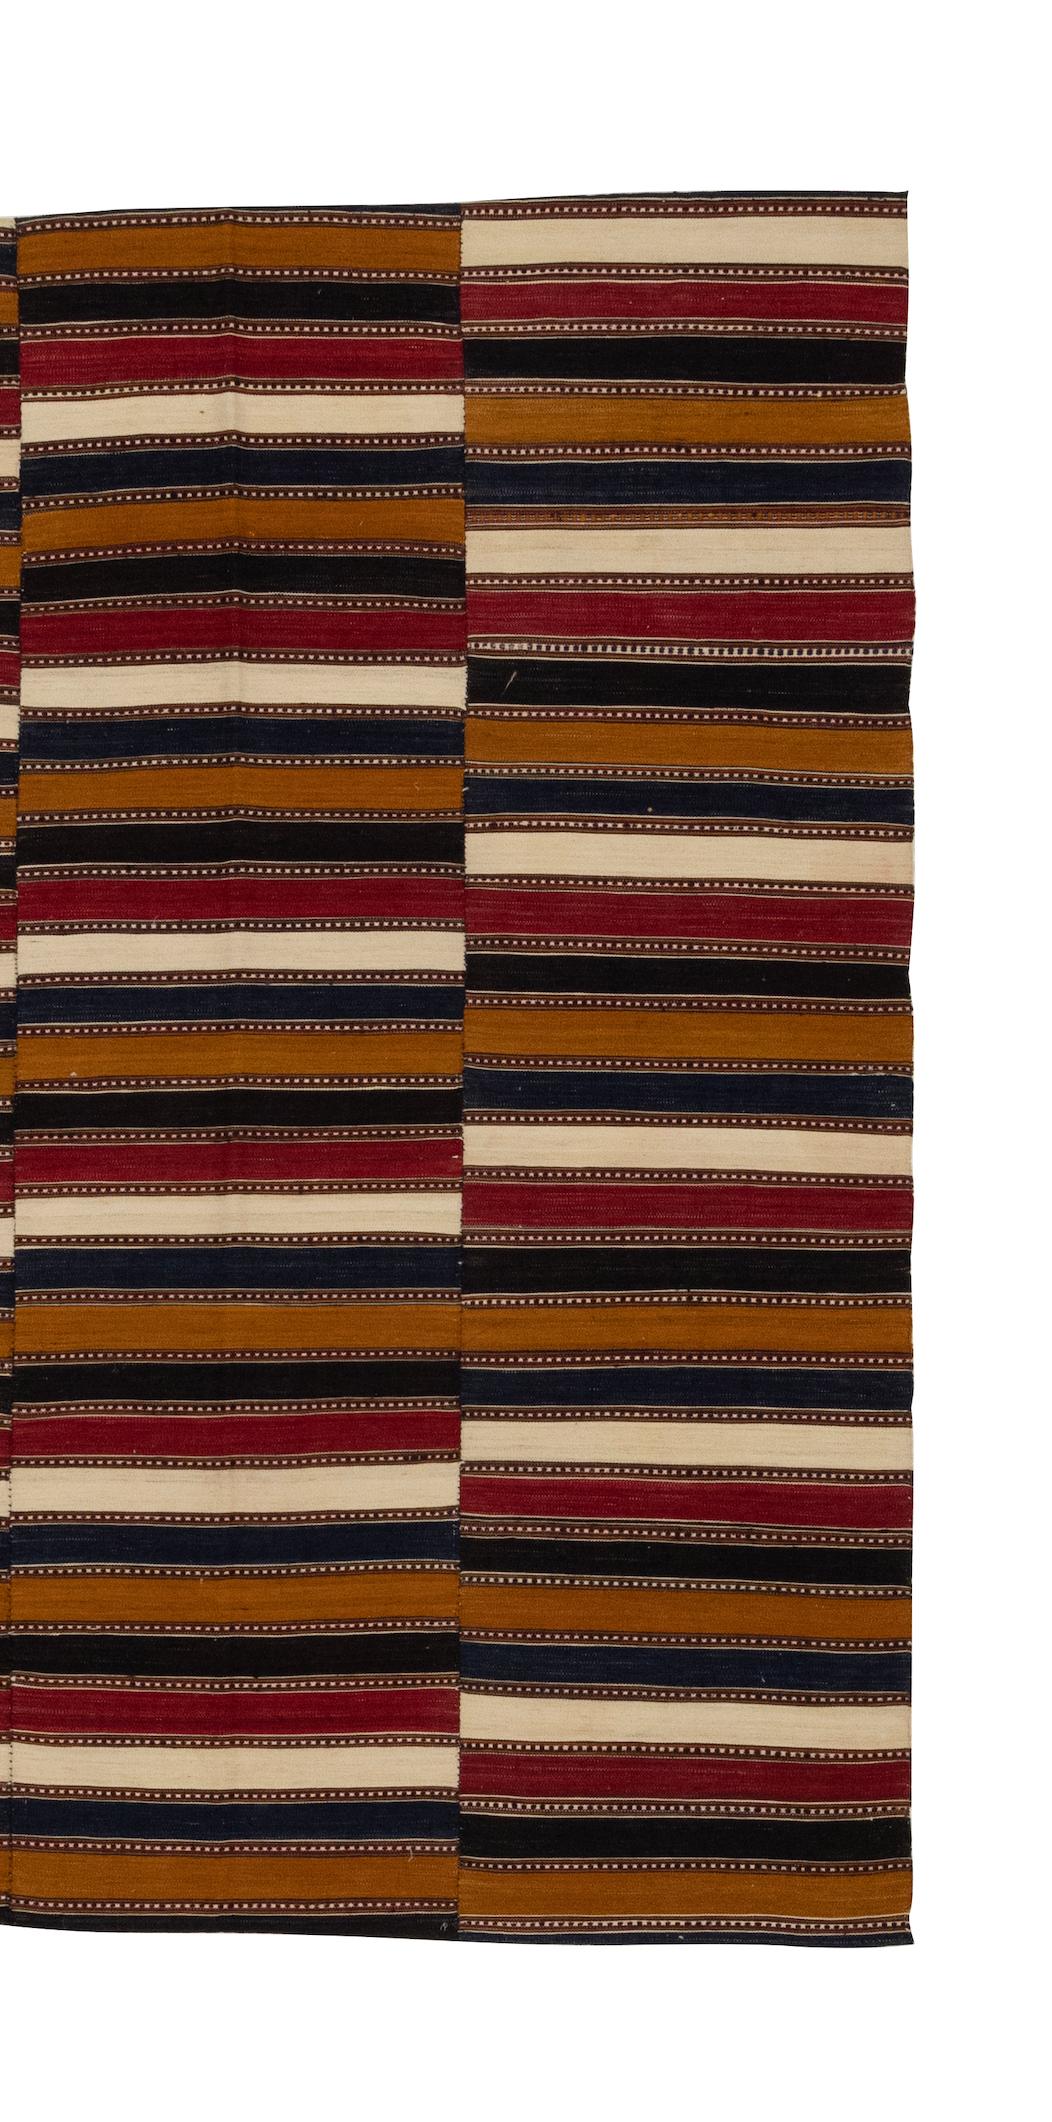 This is a vintage Kilim rug circa 1900. This rug is magnificent considering the complicity of pattern and color.

Kilims are pile less textiles often produced by using flat weaving techniques. The word “kilim” comes from Turkish origins, however